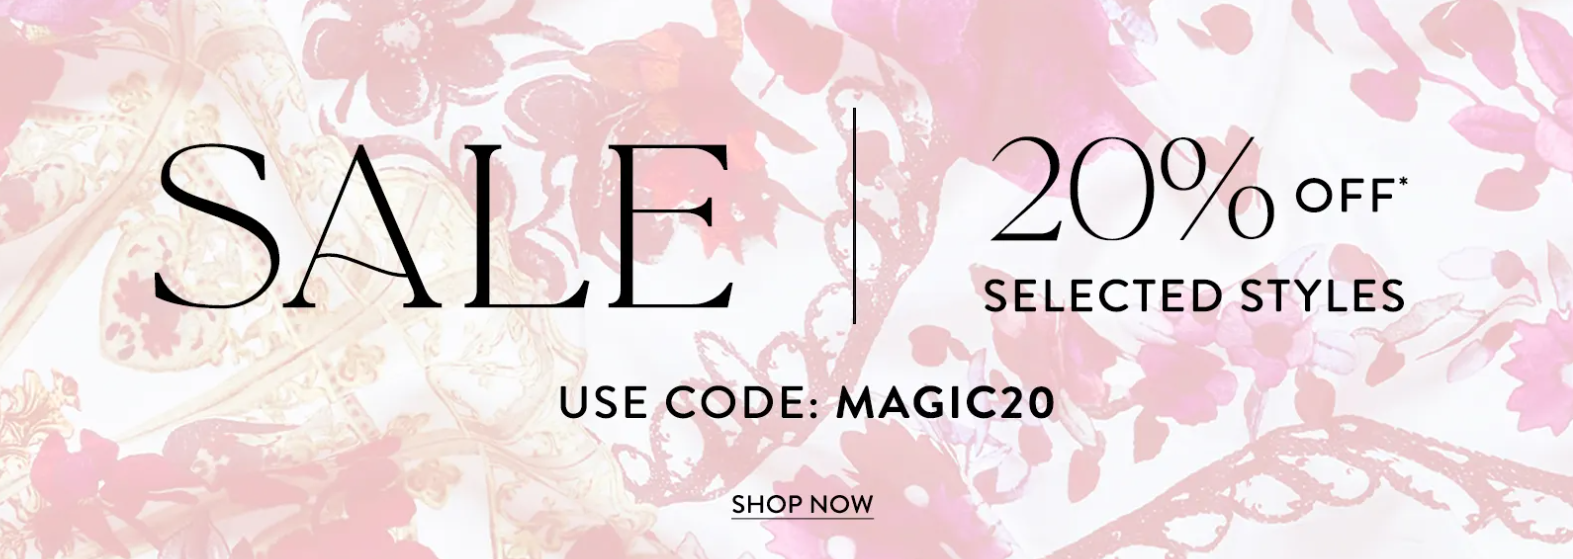 Take a further 20% OFF on selected styles with Camilla discount code